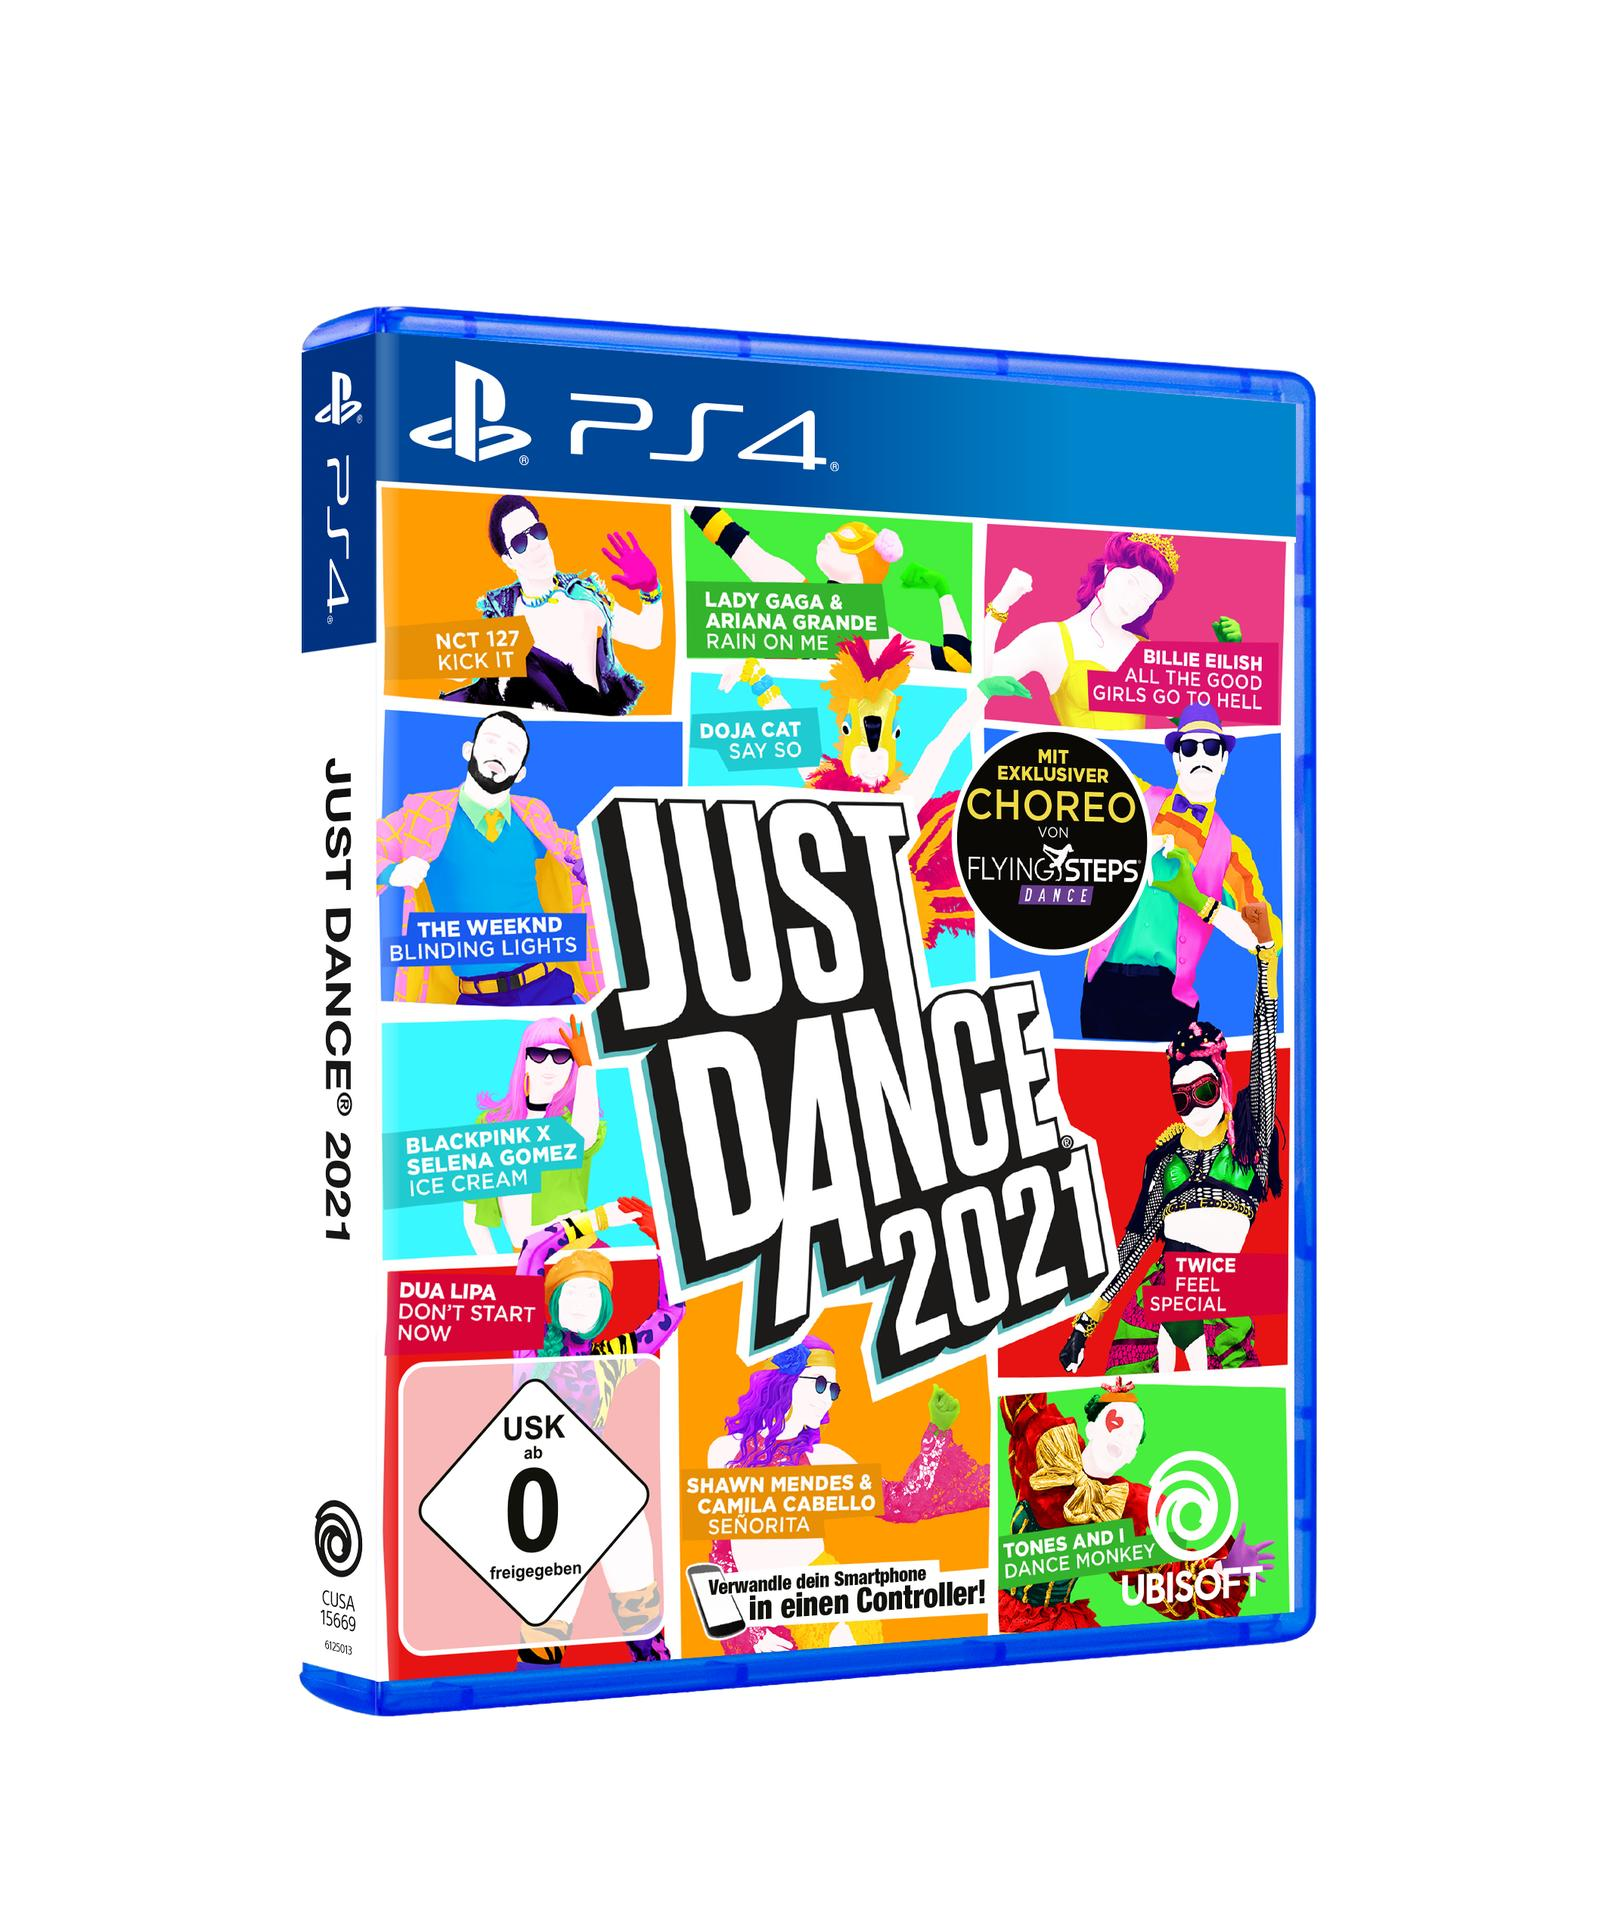 2021 4] [PlayStation JUST - PS4 DANCE